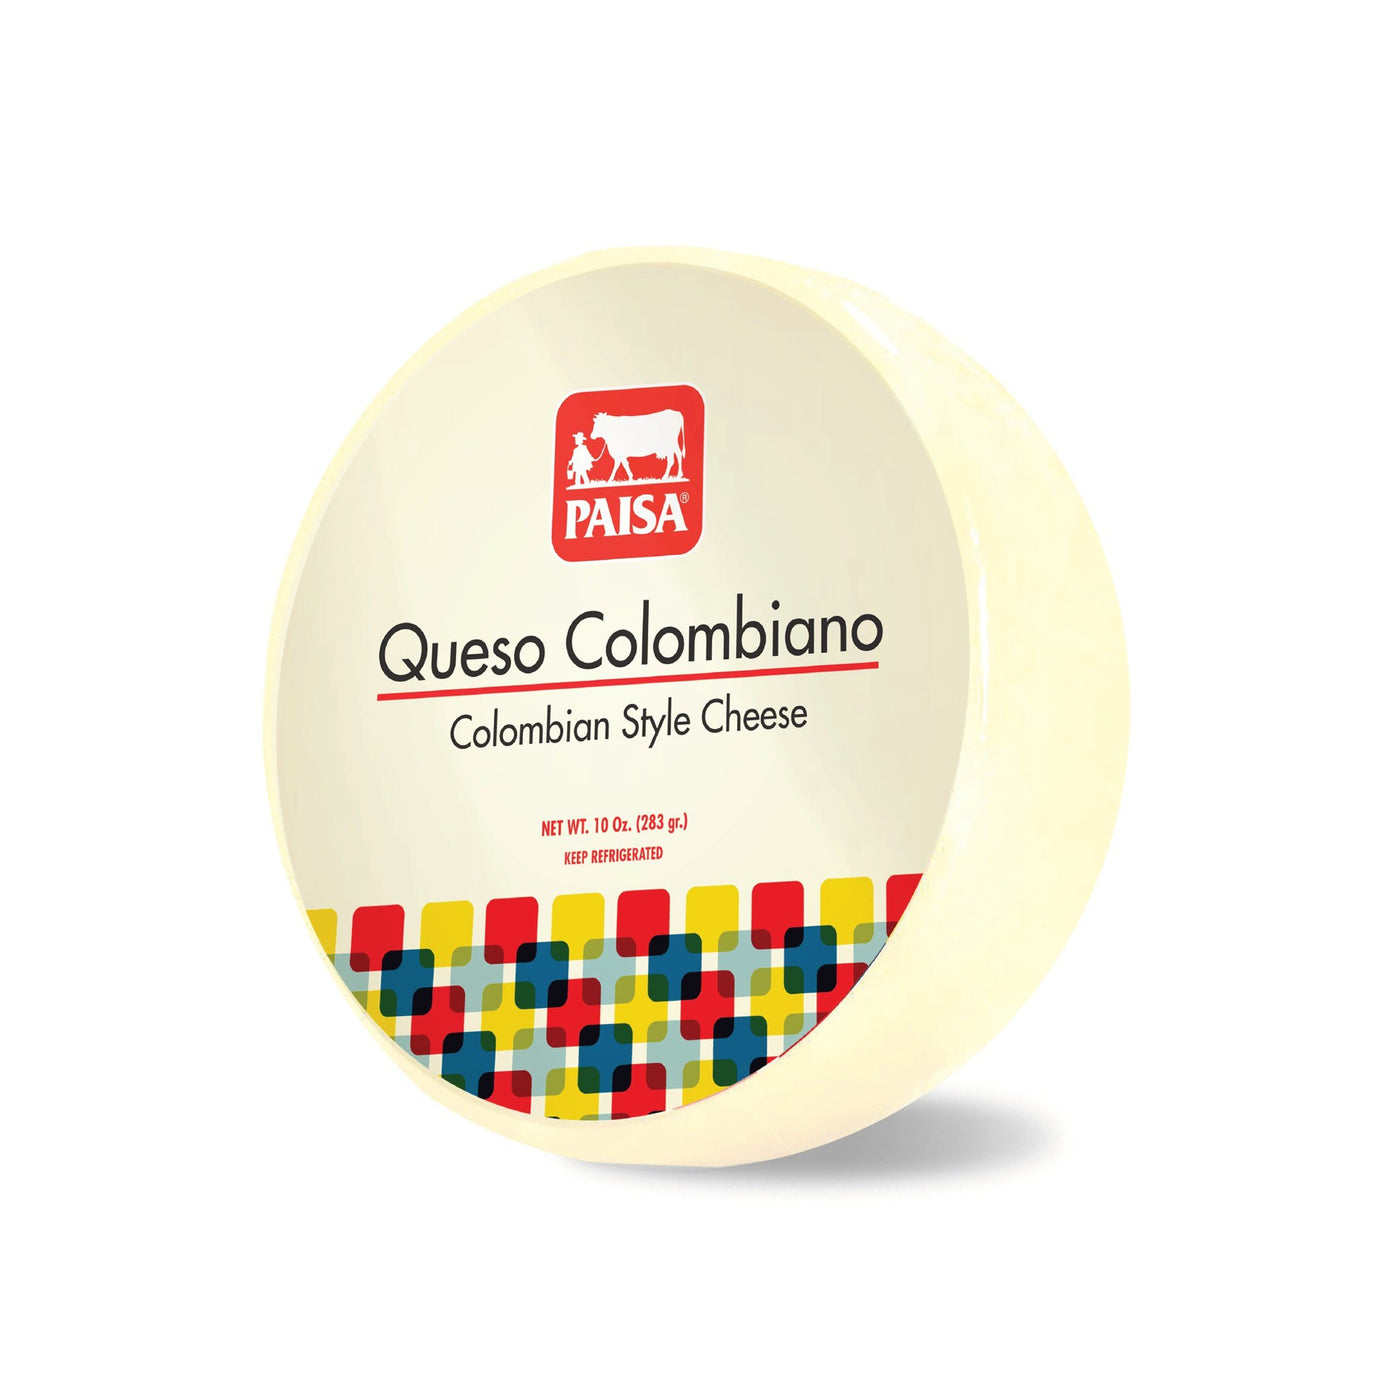 Queso Colombiano - Colombian Cheese.